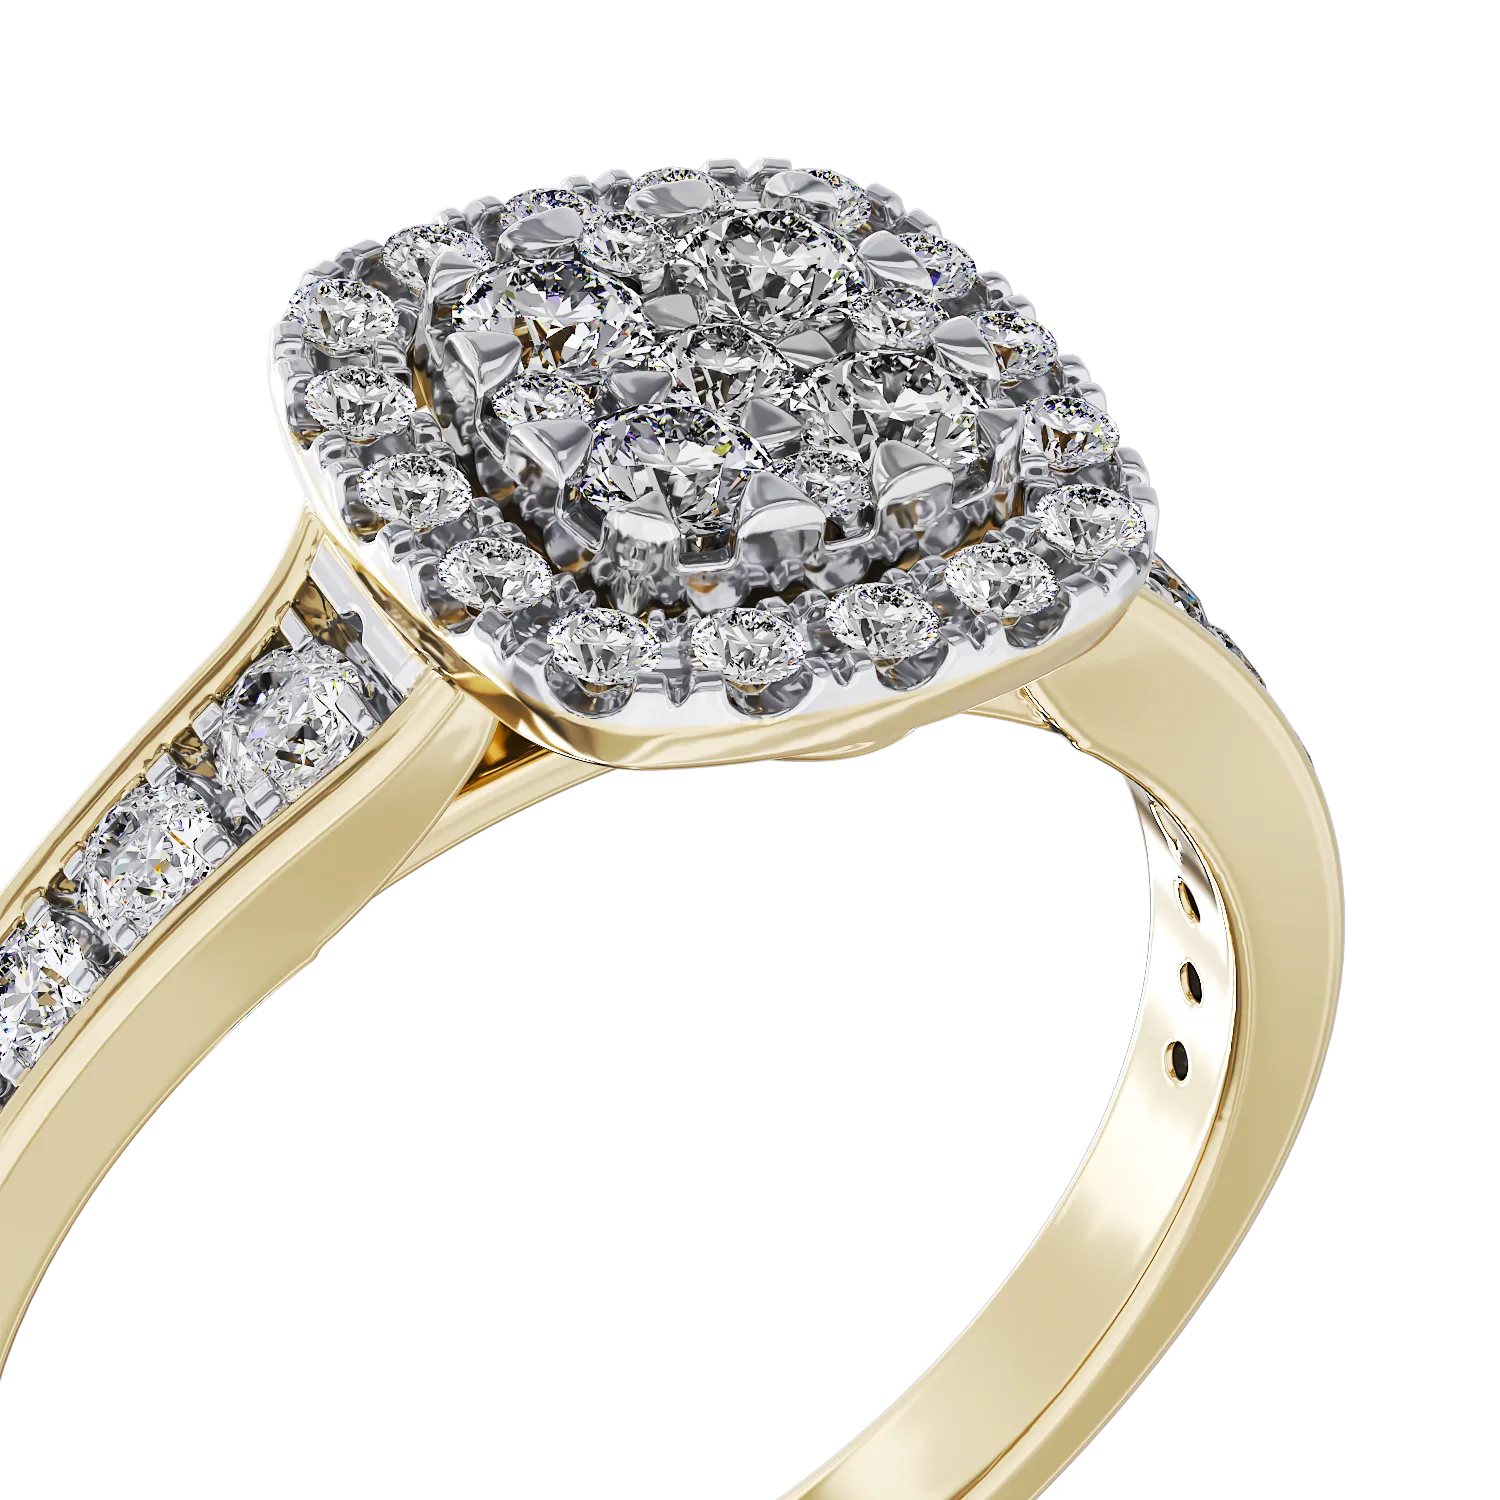 18K yellow gold engagement ring with 0.52ct diamonds